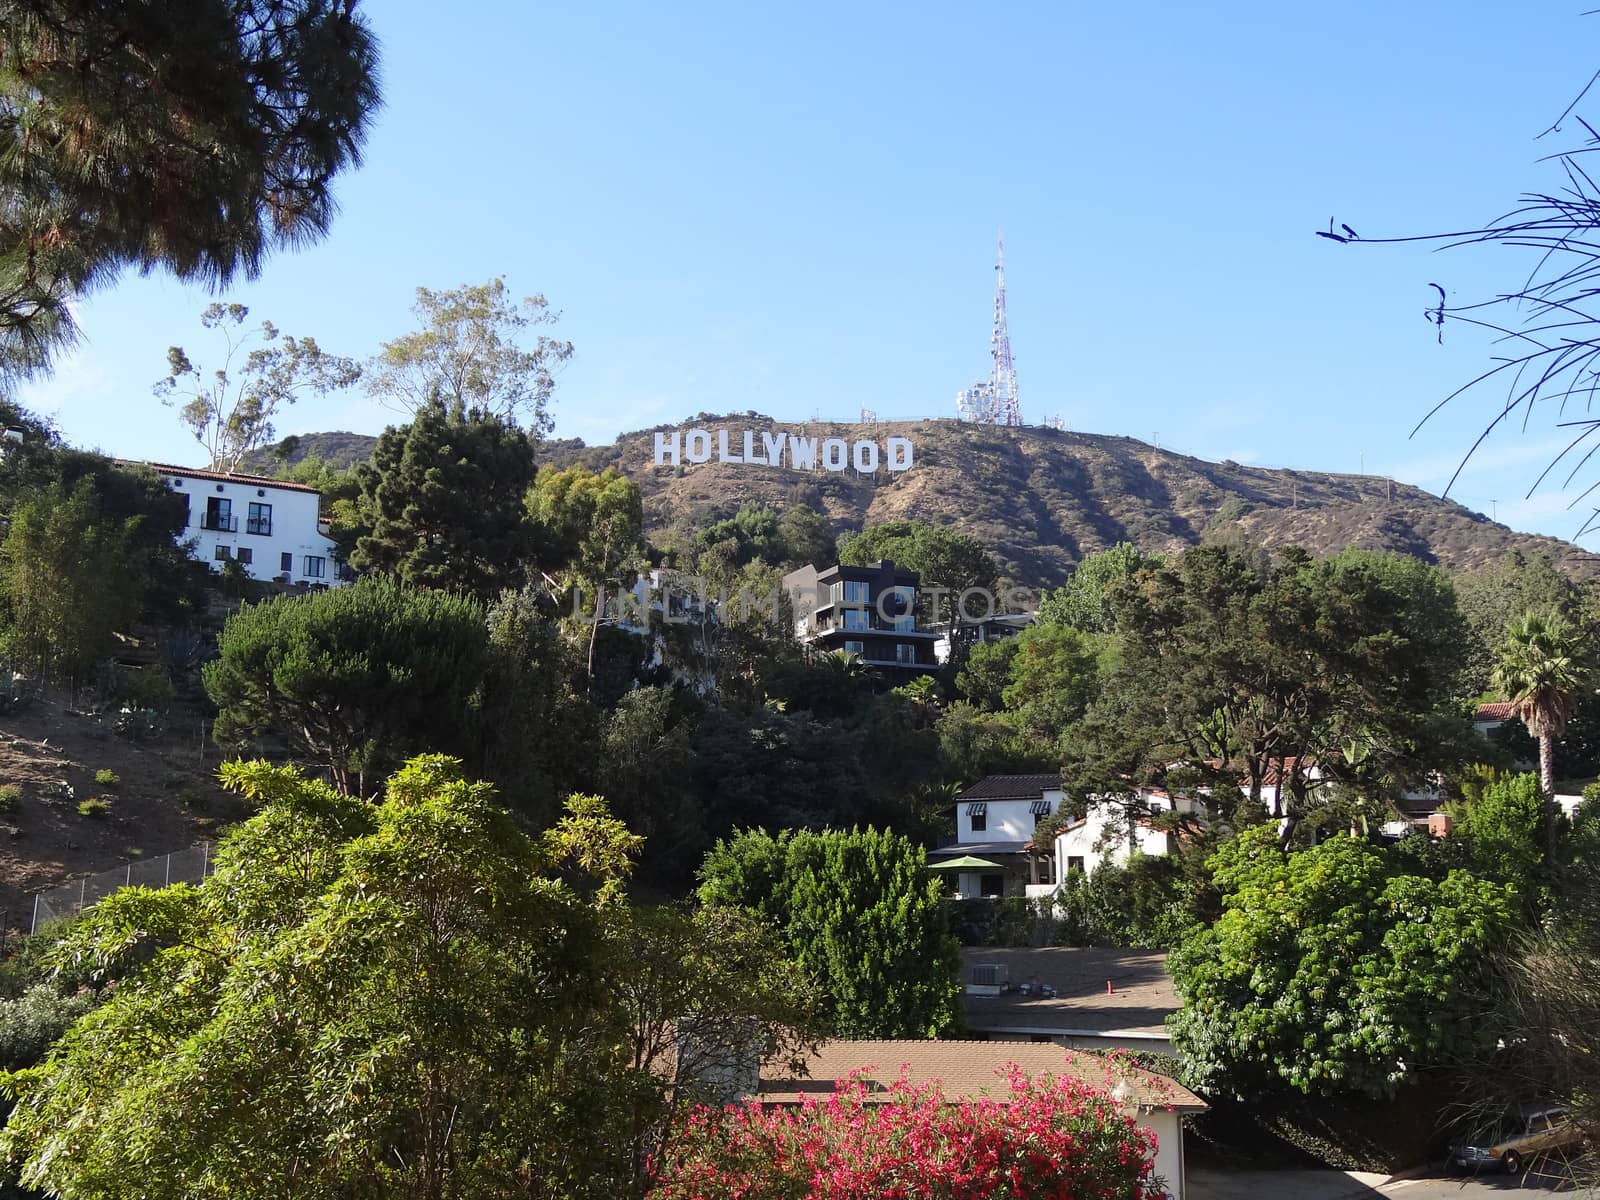 the world famous landmark hollywood sign in Los Angeles